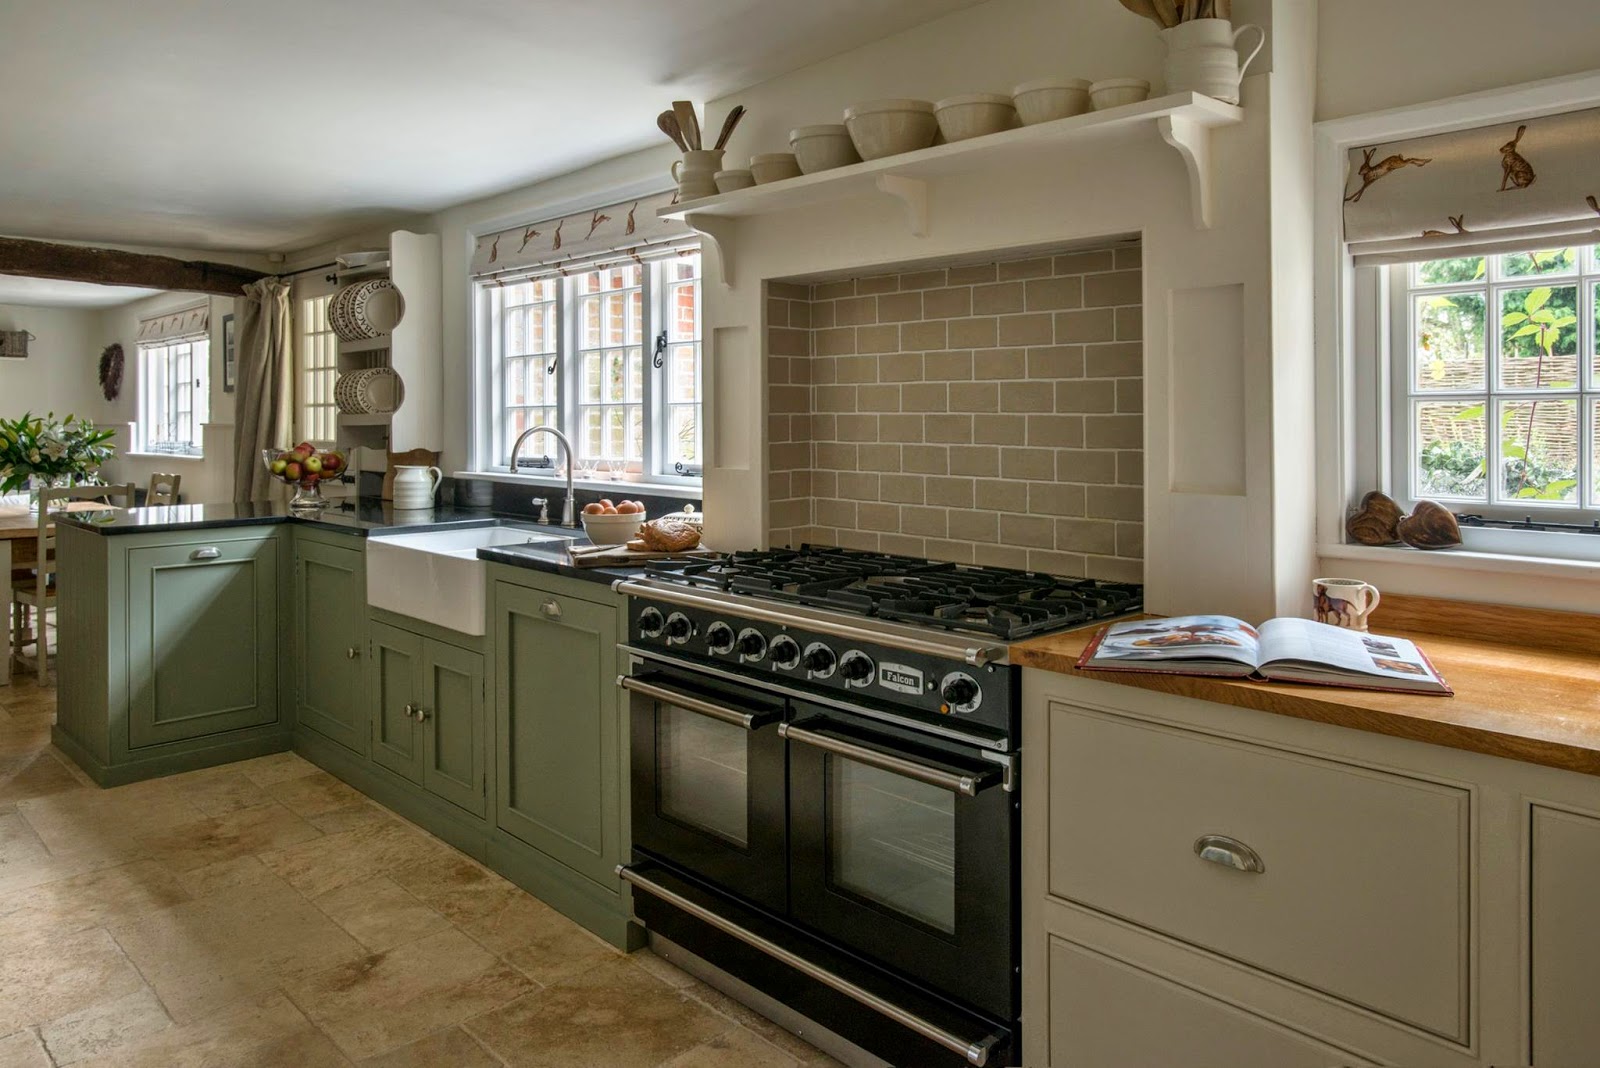 Modern Country Style: Modern Country Kitchen and Colour Scheme